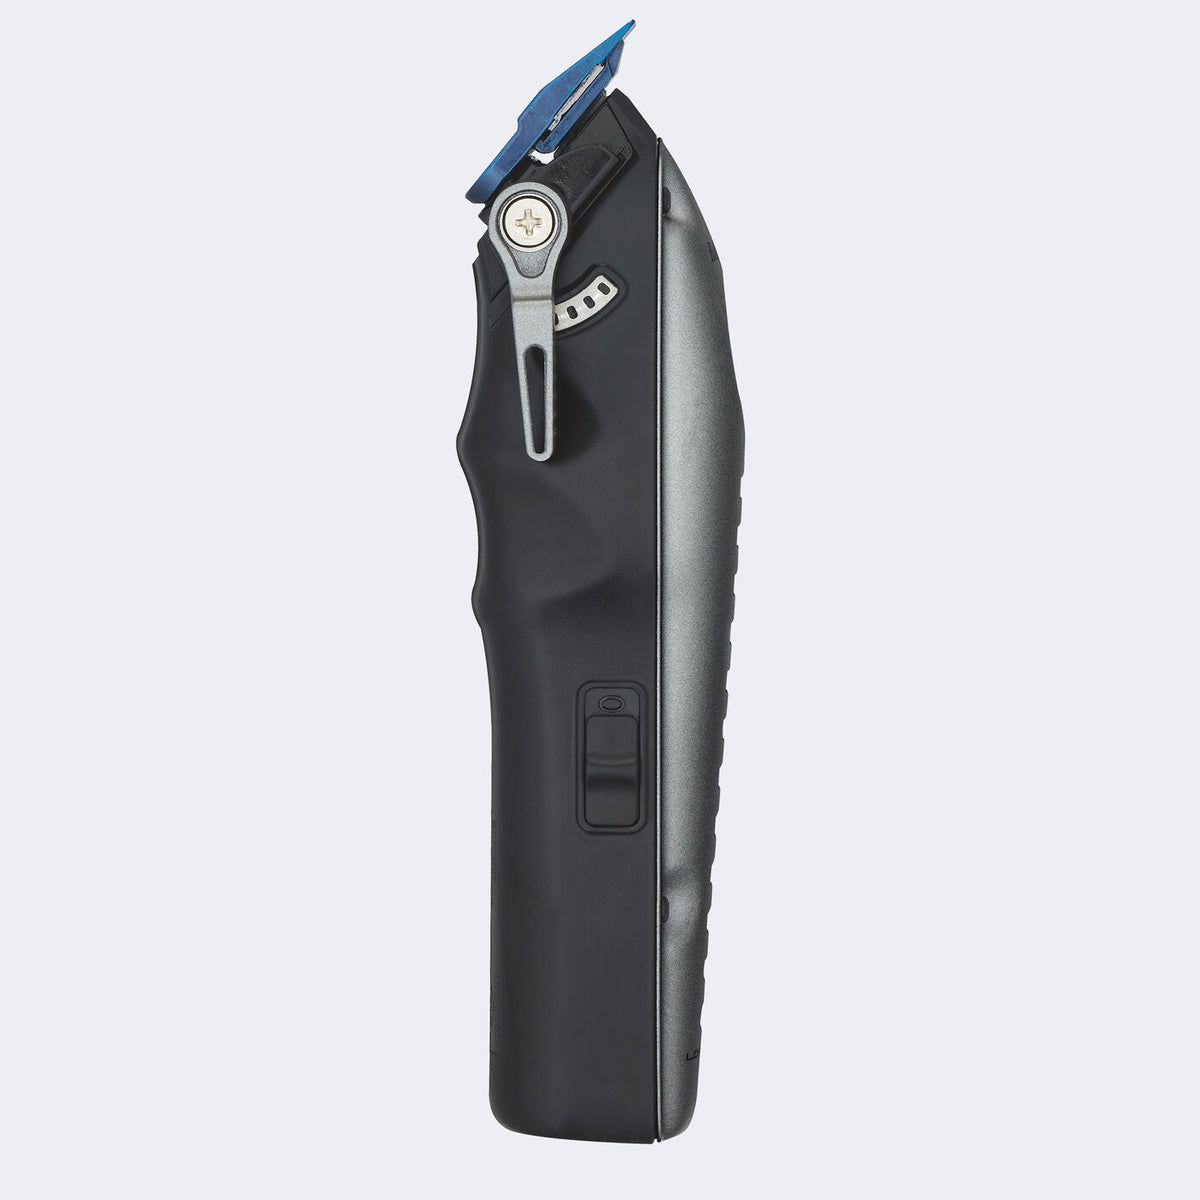 BaBylissPRO LoProFX FXONE High Performance Clipper